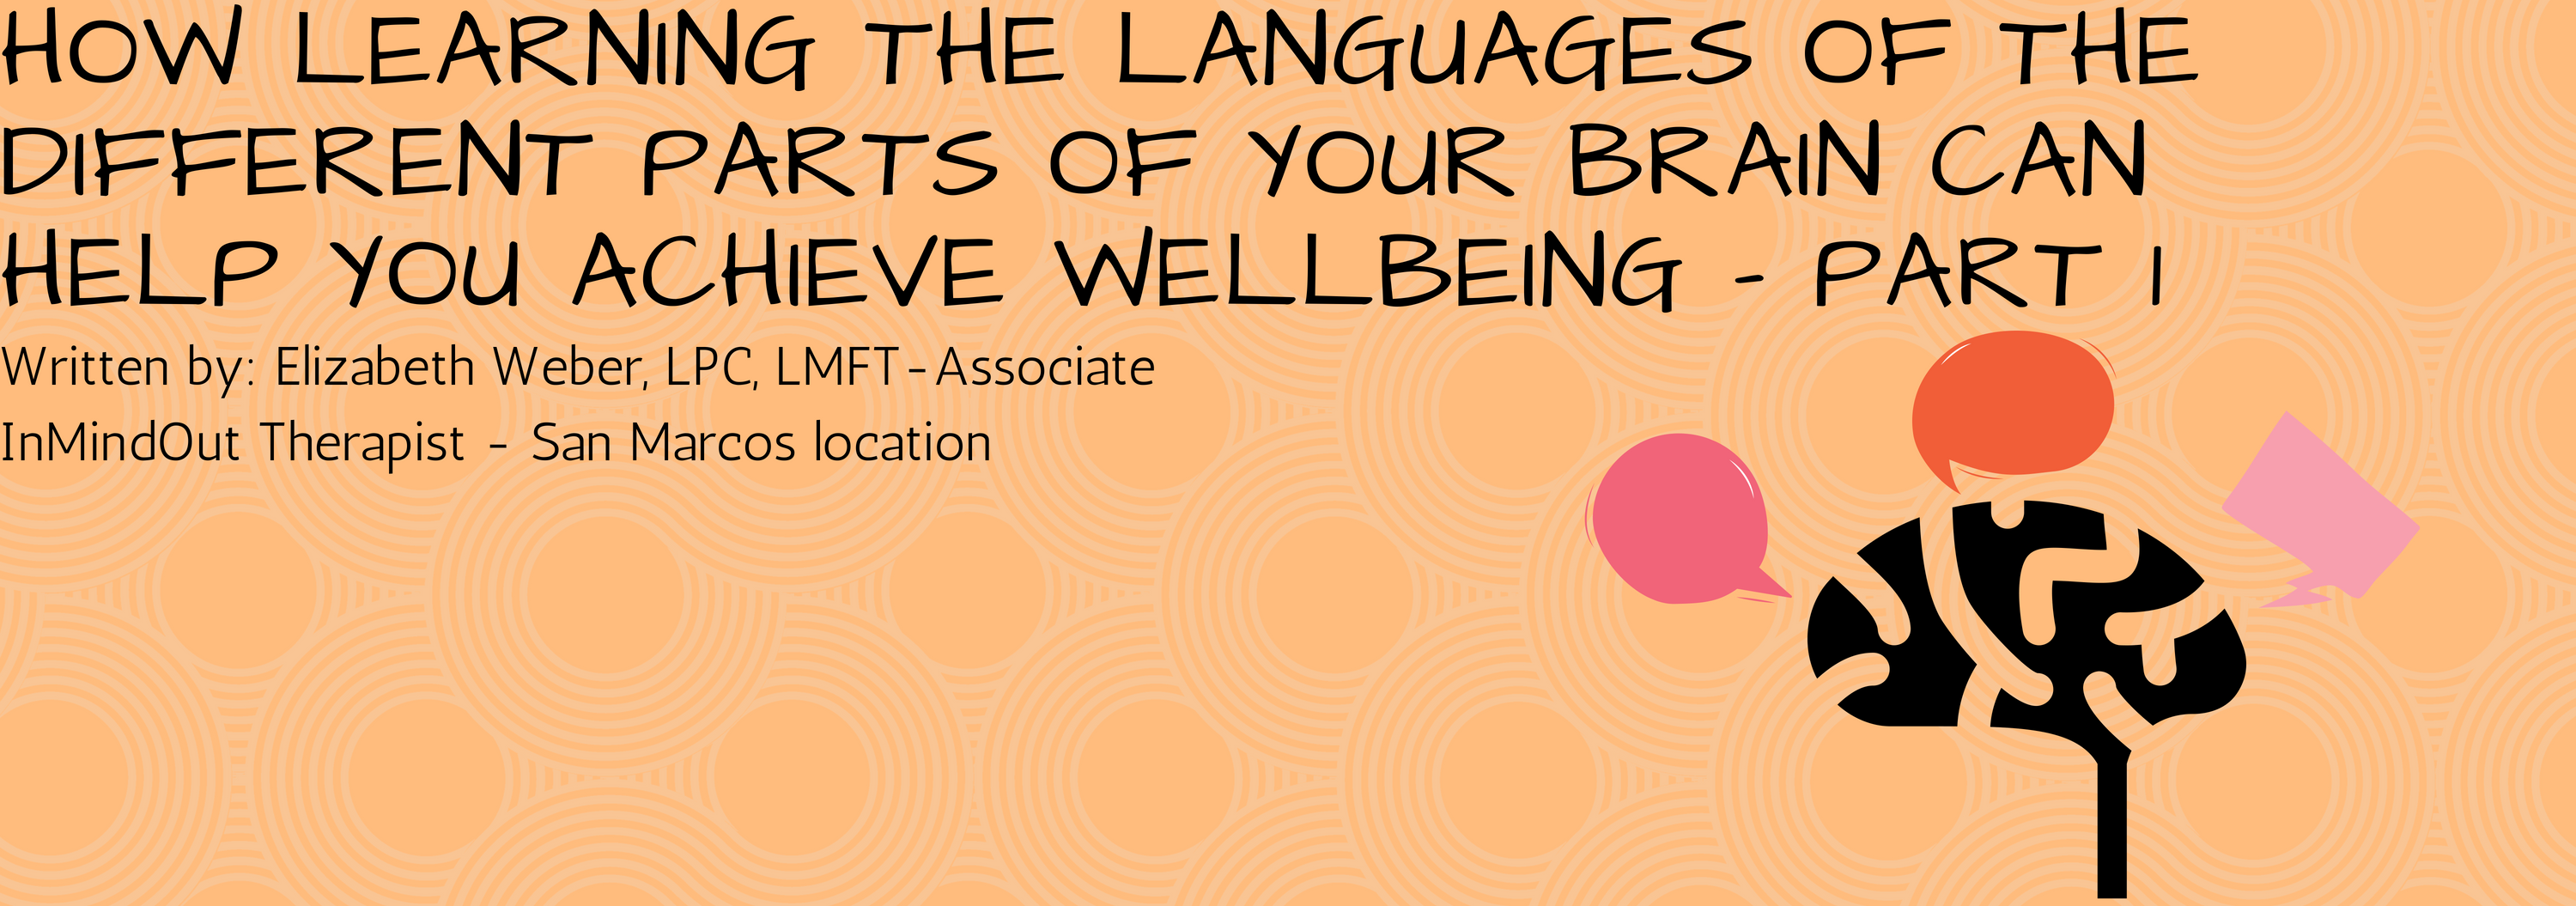 How Learning the Languages of The Different Parts of Your Brain Can Help You Achieve Wellbeing